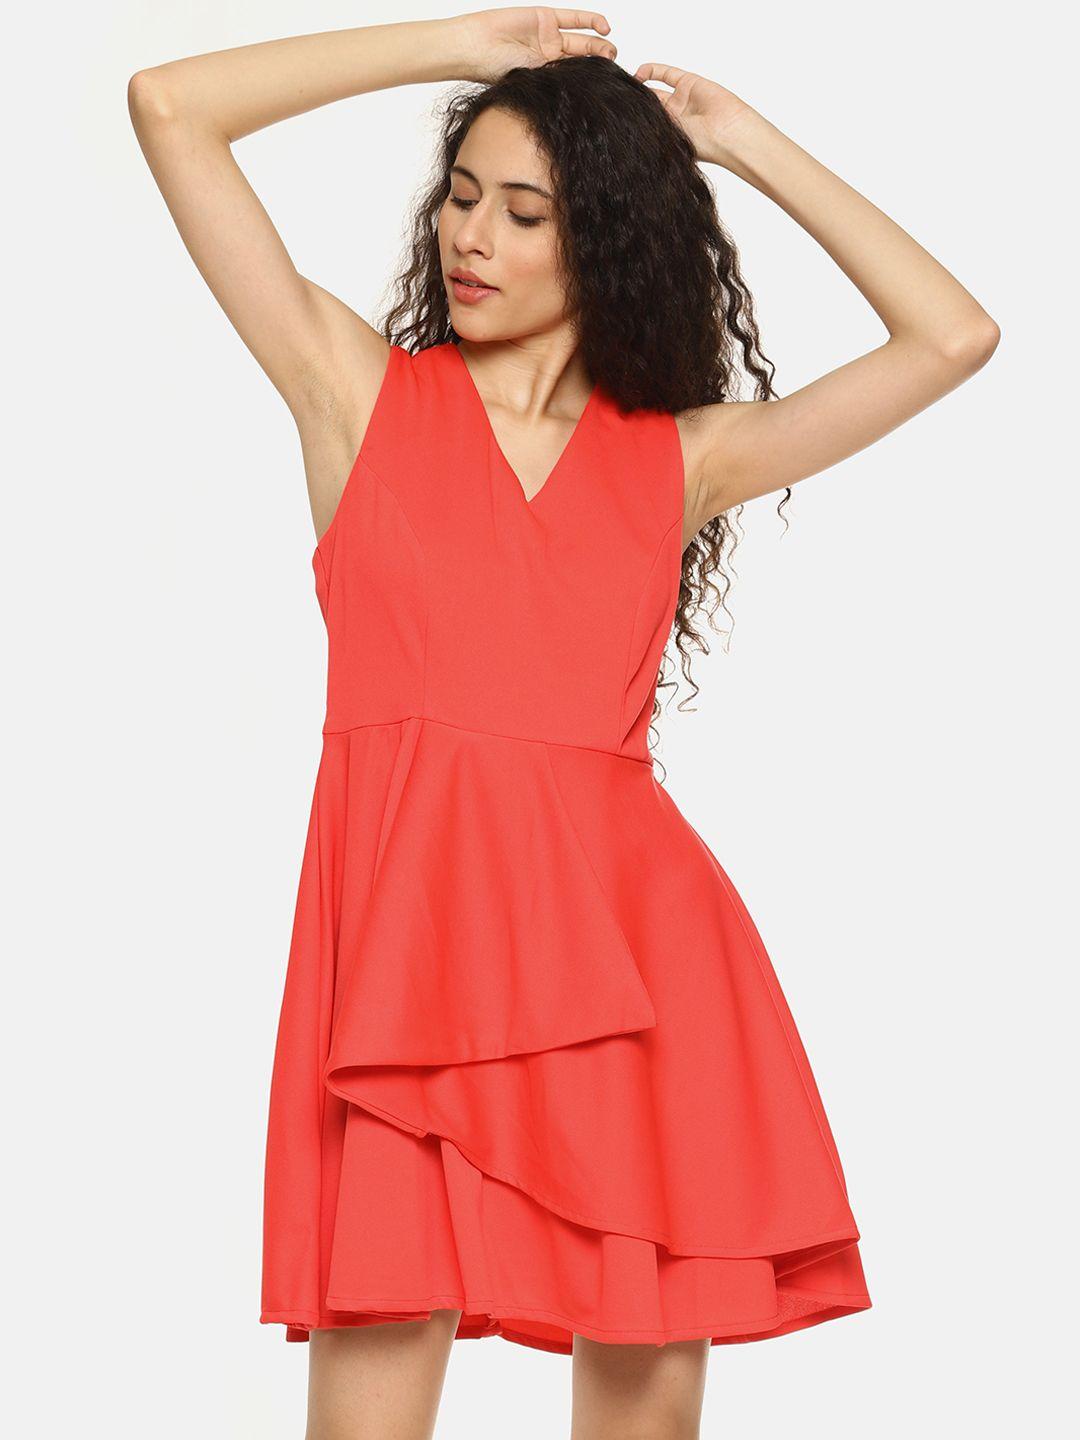 aara-women-coral-orange-solid-fit-and-flare-dress